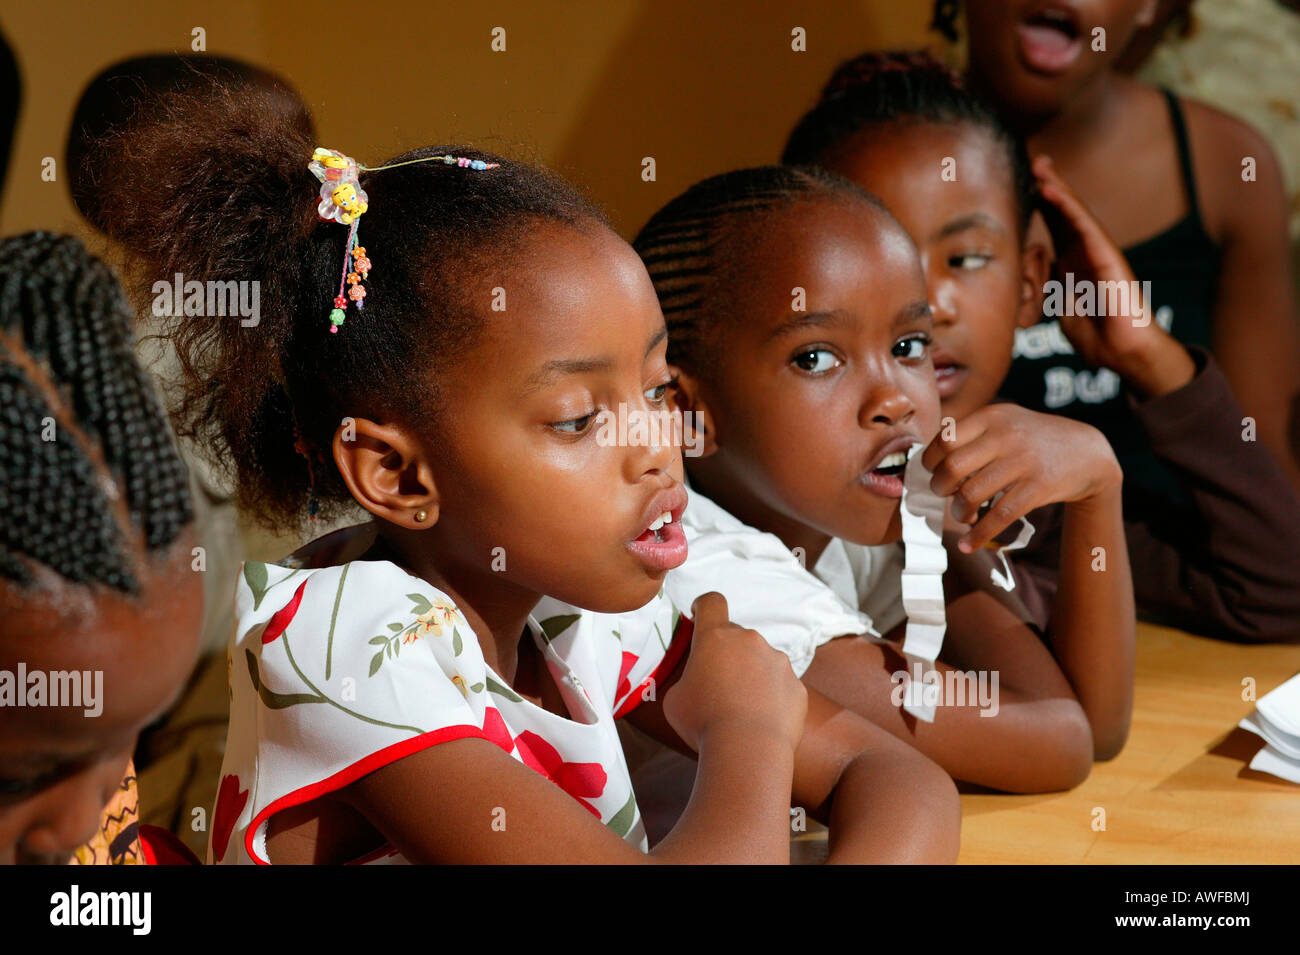 Children sitting at a table, Francistown, Botswana, Africa Stock Photo